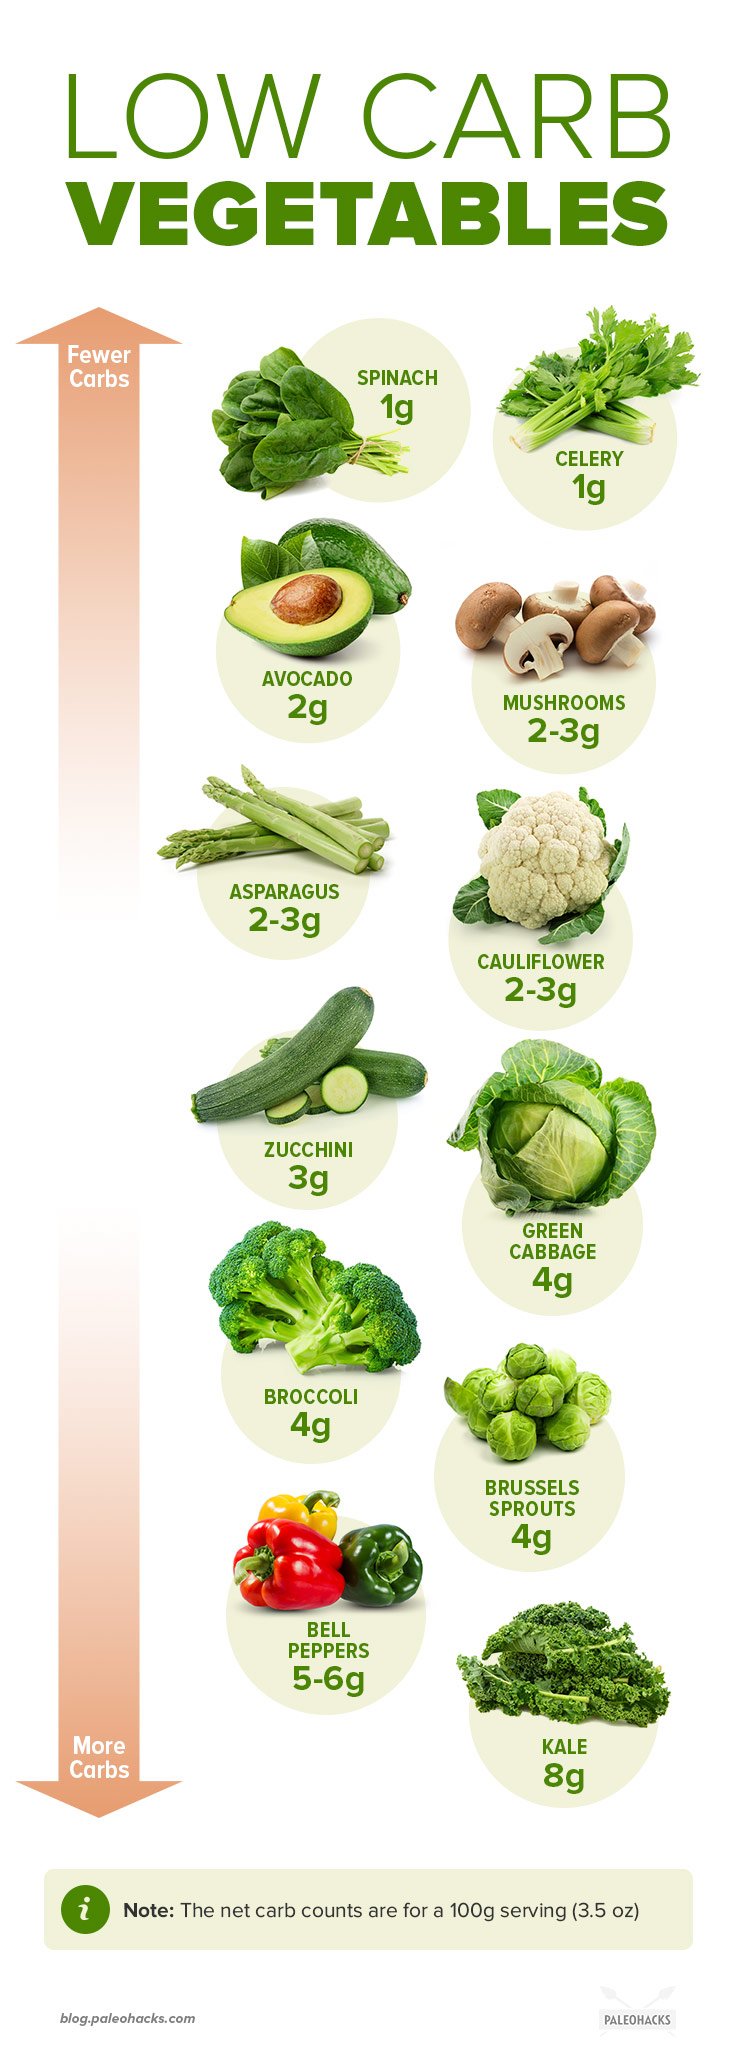 If you’re going keto or simply want to cut back on carbs, look to this easy guide for the best low-carb veggies for your diet.